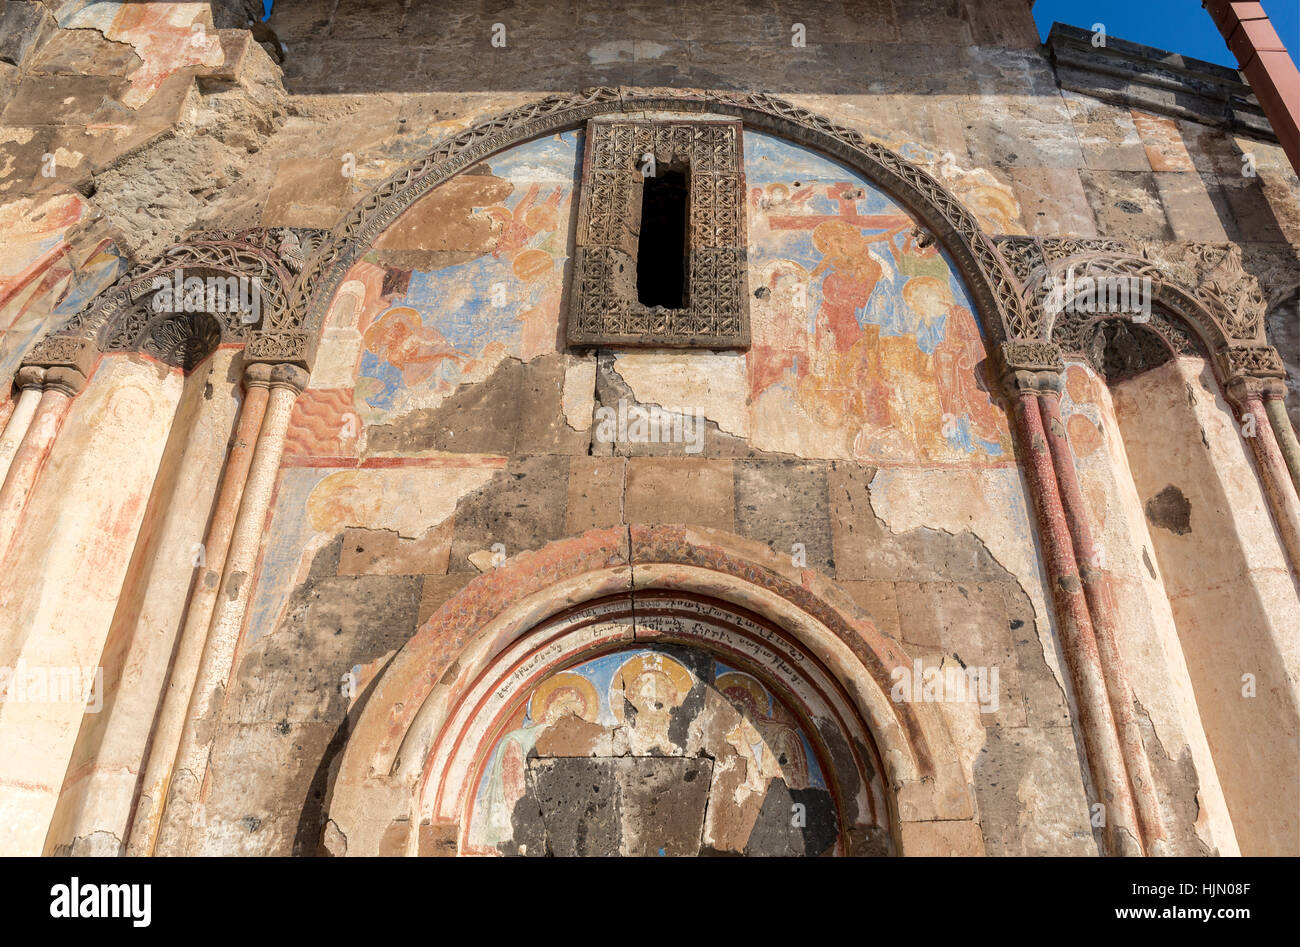 Frescos of Tigran Honents church in Ani is a ruined medieval Armenian city now situated in the Turkey's province of Kars and next to the closed border Stock Photo